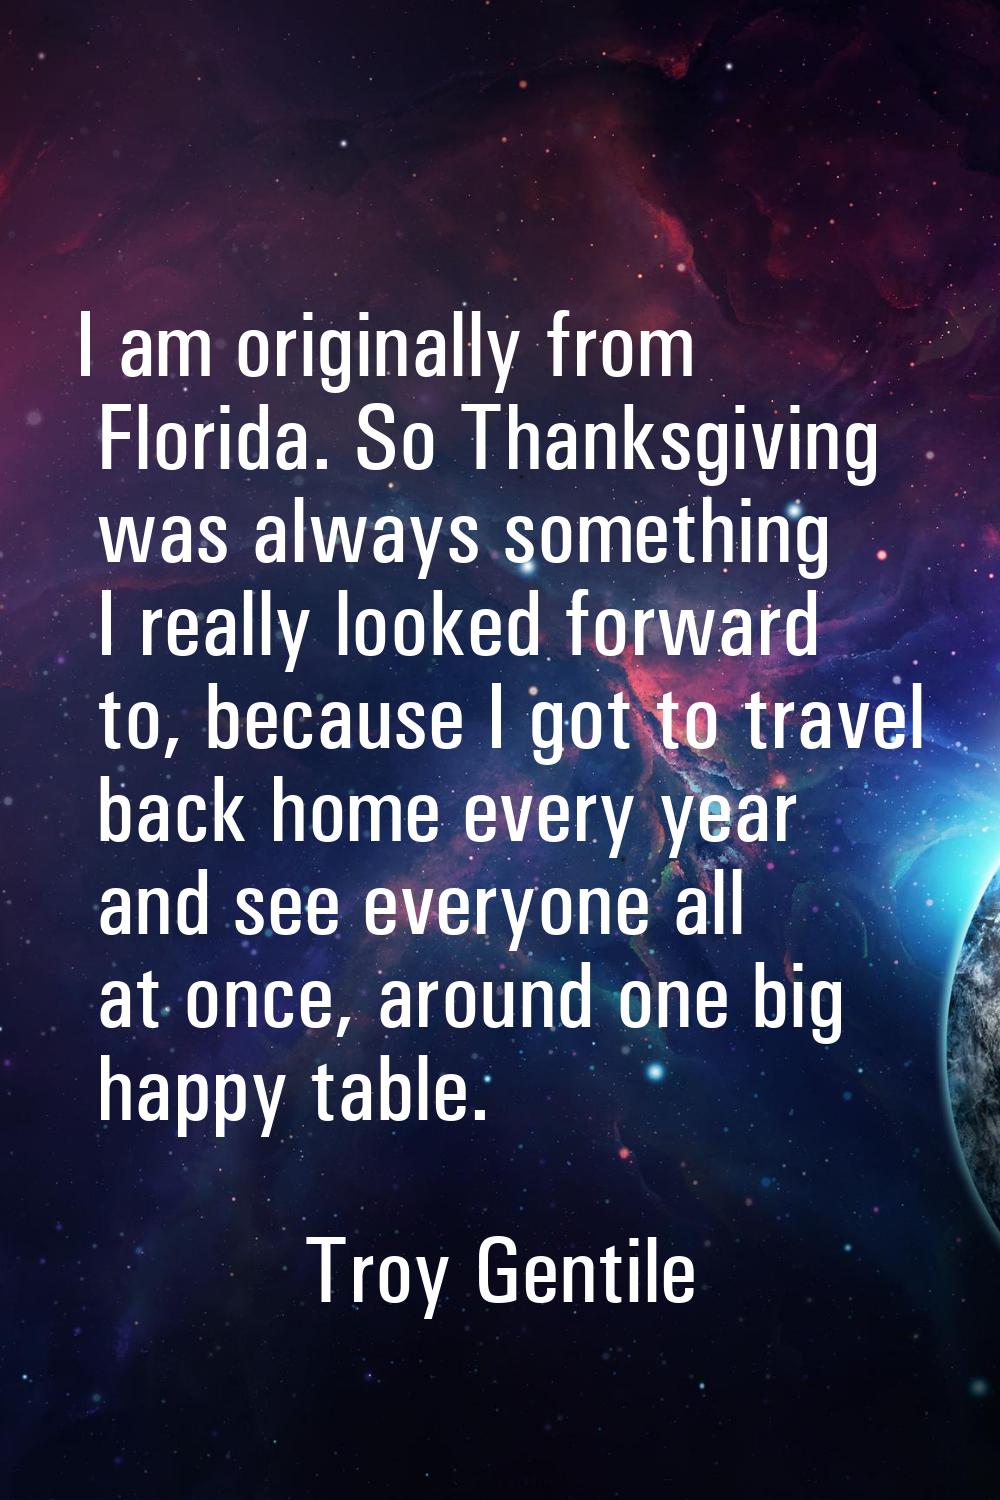 I am originally from Florida. So Thanksgiving was always something I really looked forward to, beca